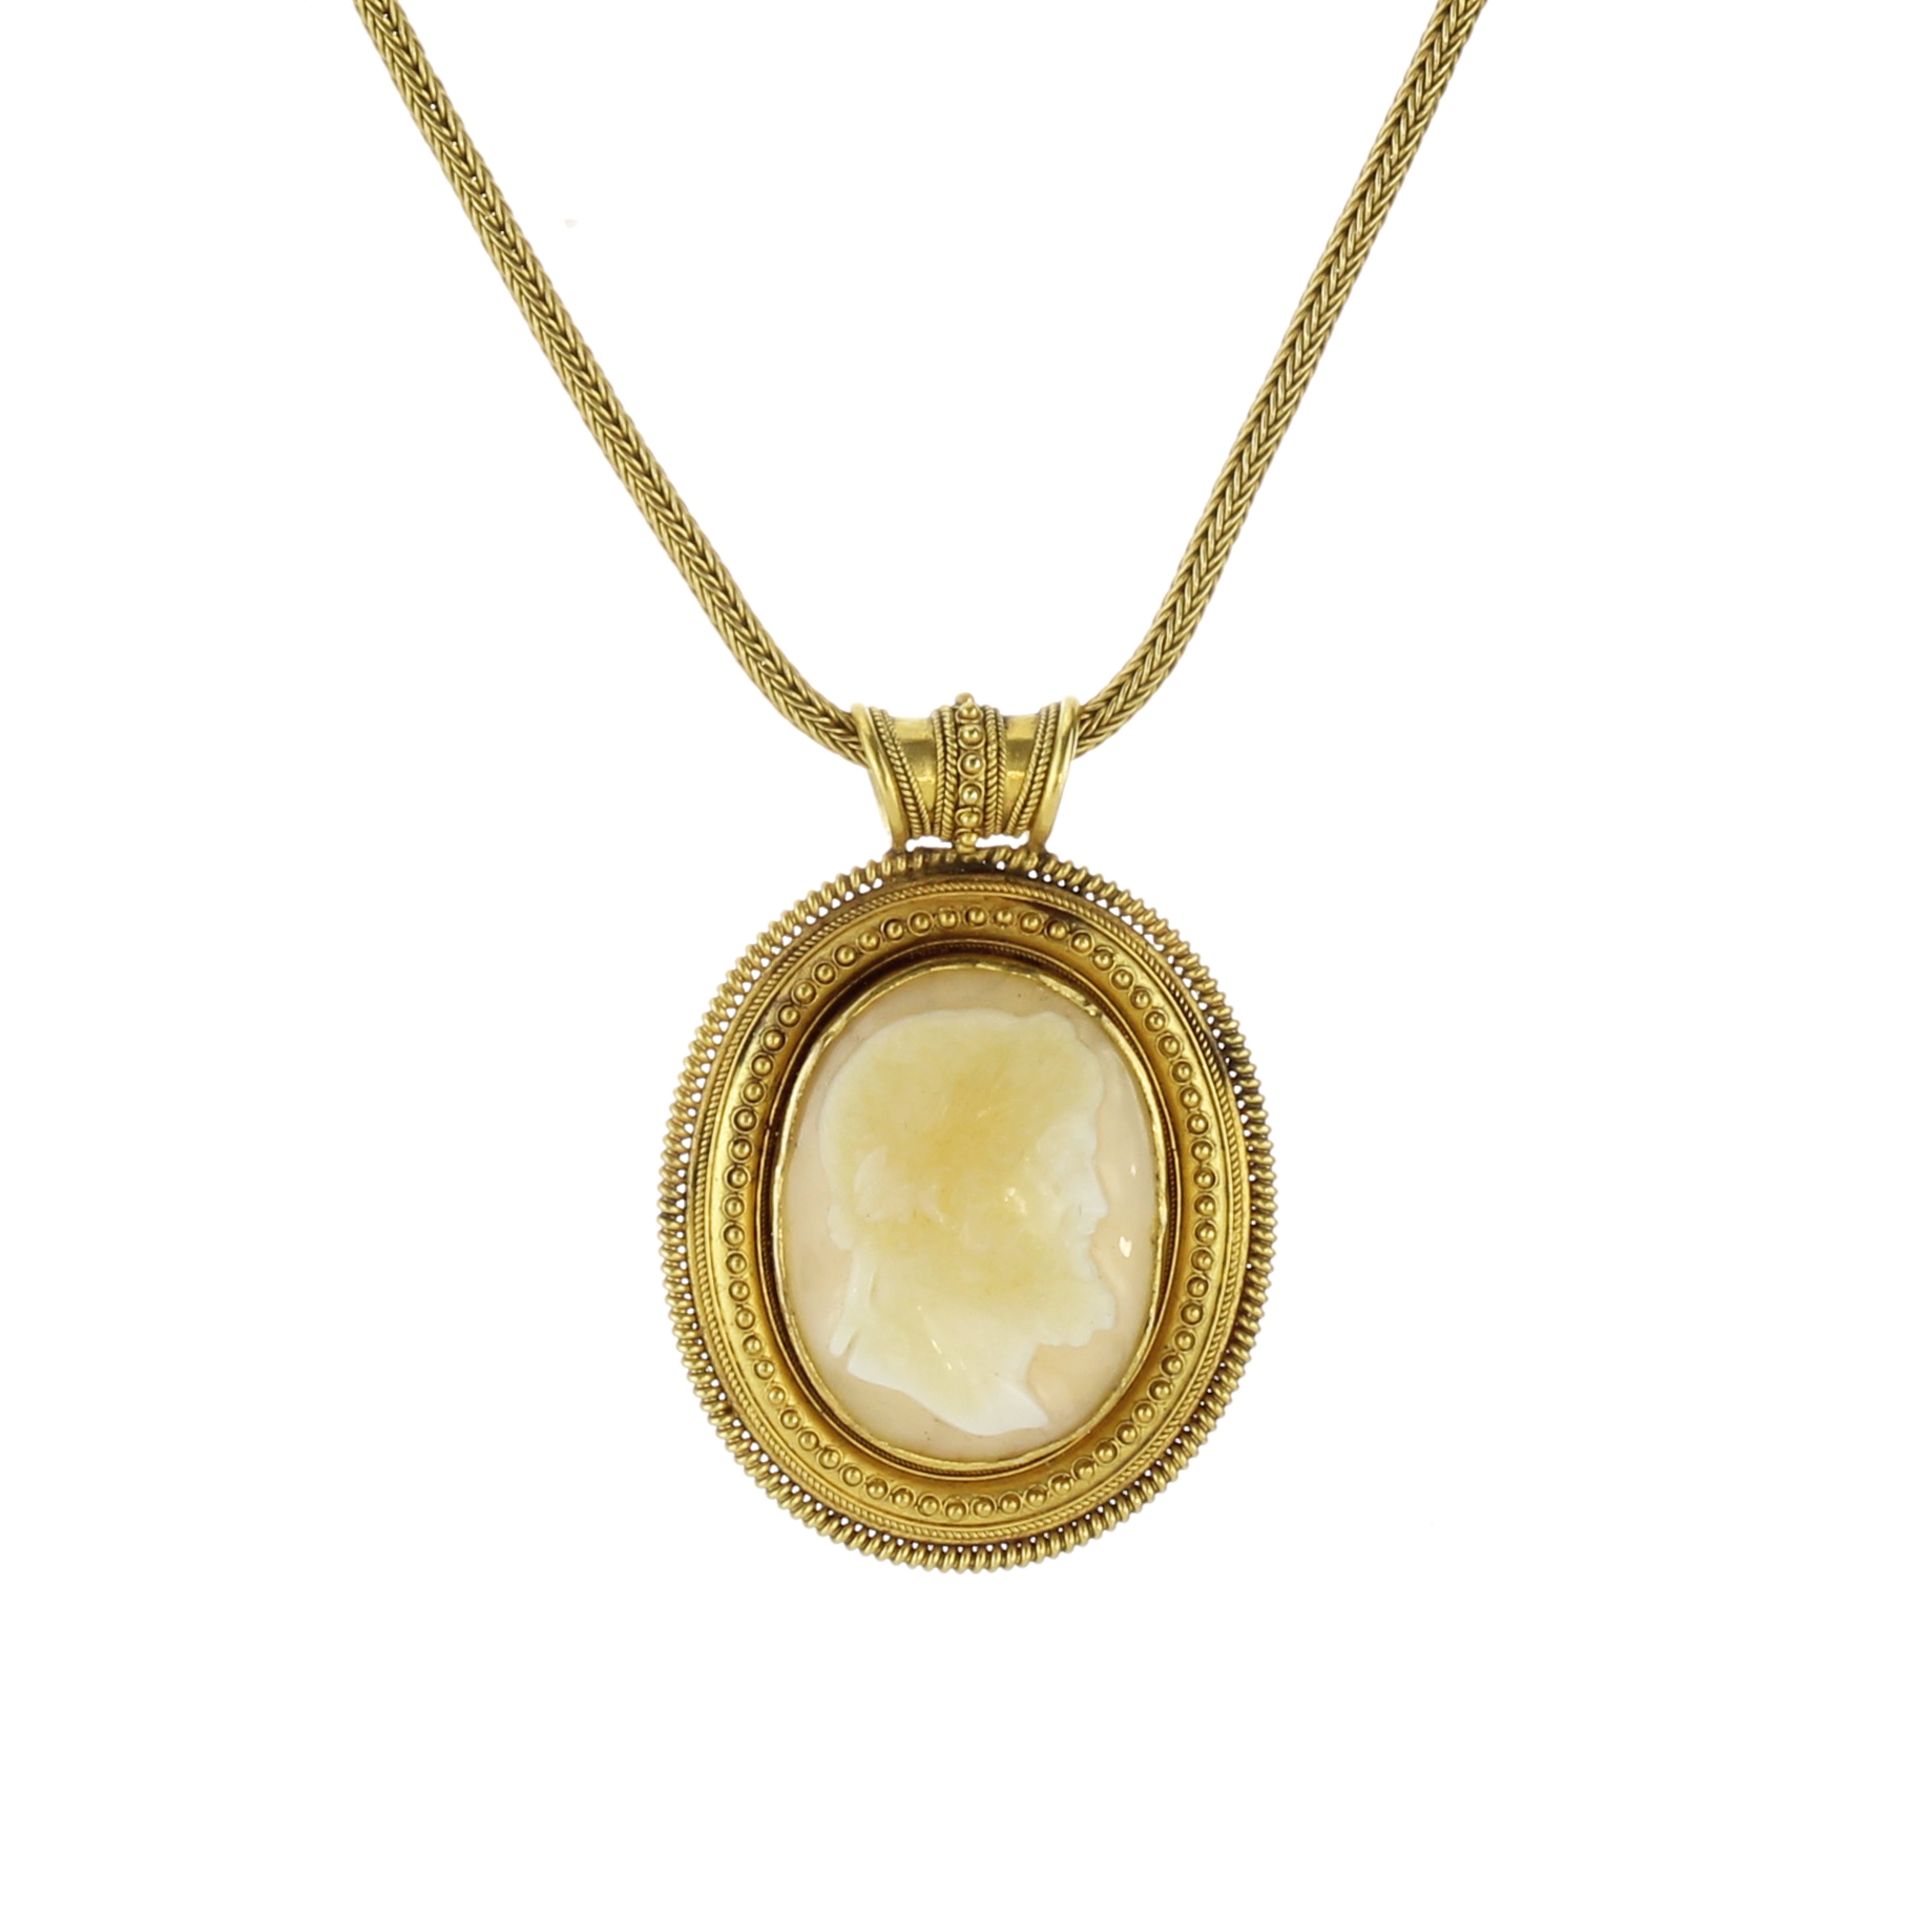 A rare antique 19th Century Etruscan revival cameo pendant in high carat yellow gold set with a